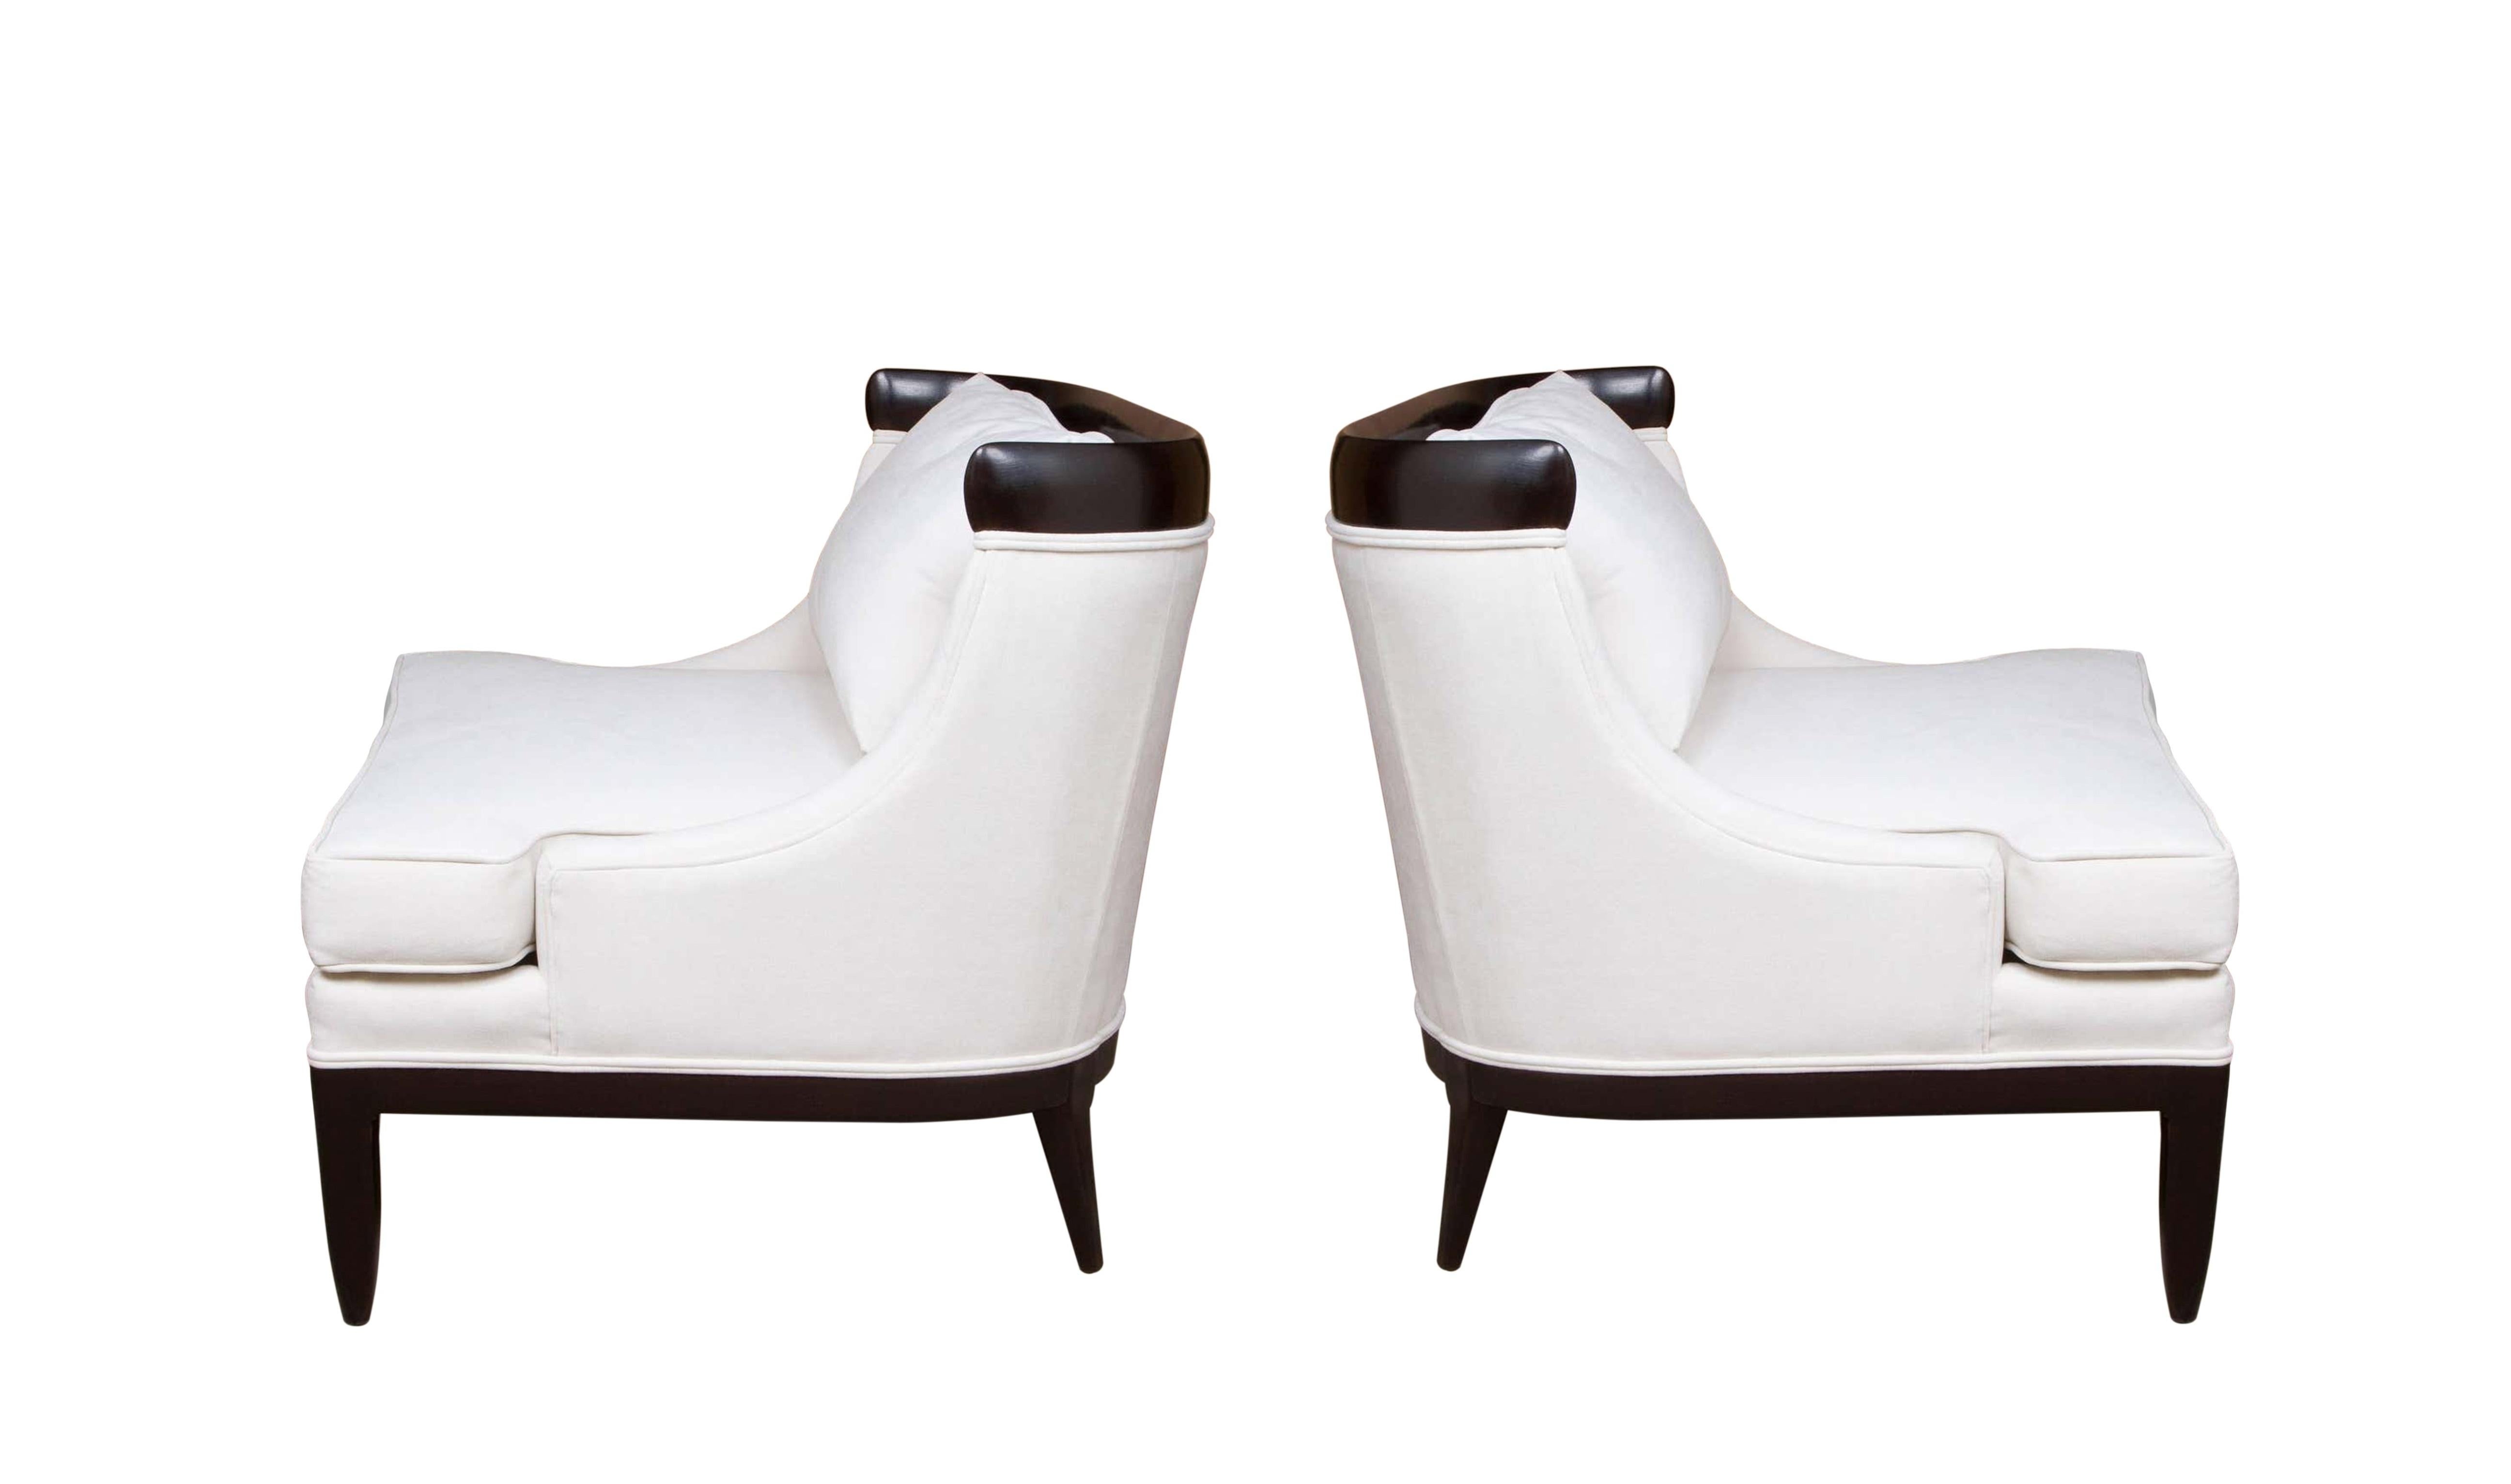 Pair of Tomlinson Sophisticate Ebonized Lounge Chairs by Erwin Lambeth In Excellent Condition For Sale In Dallas, TX